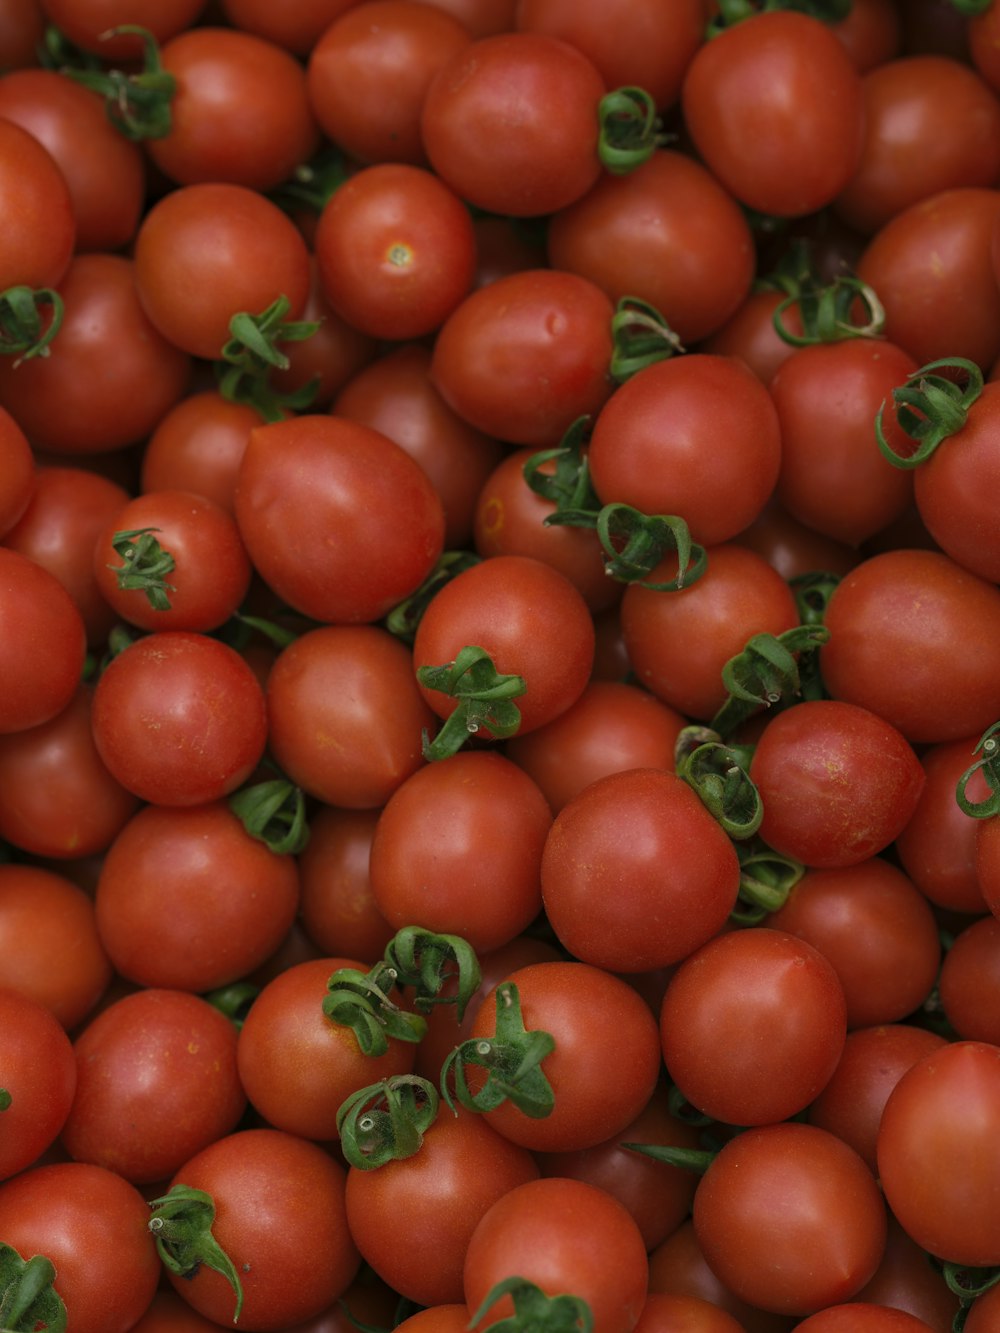 a pile of tomatoes with green leaves on them